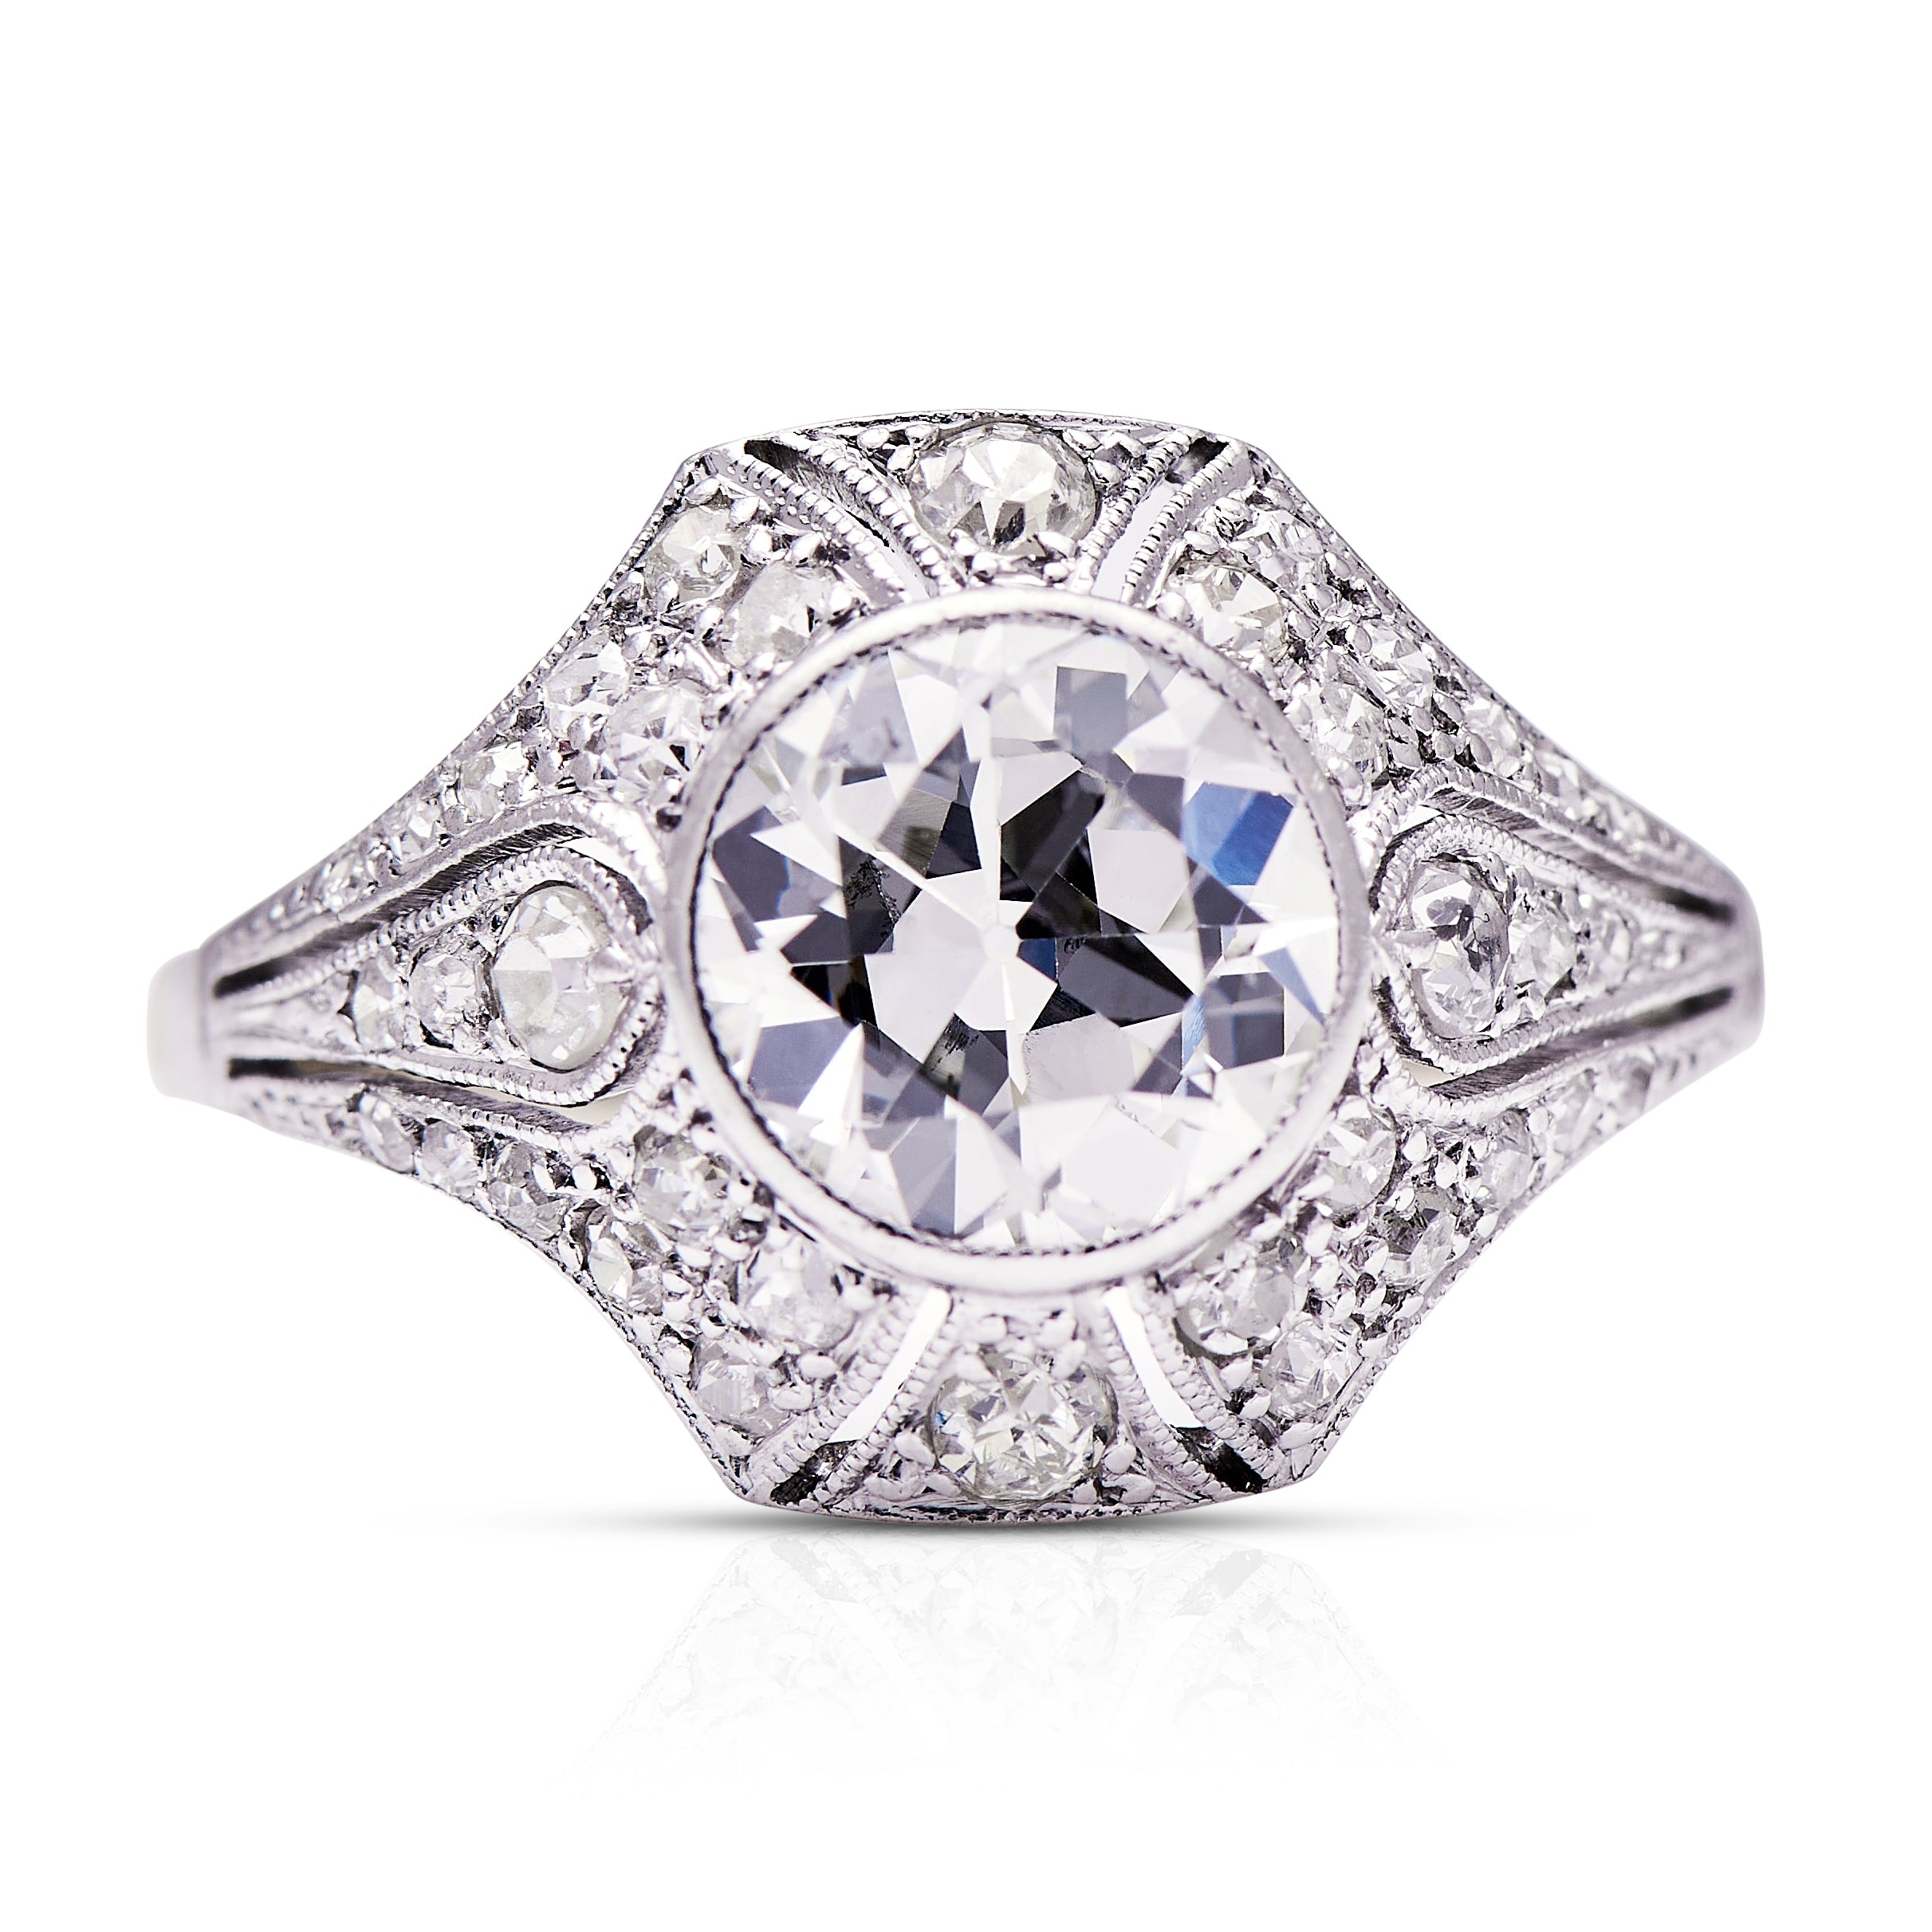 Engagement | Art Deco, 18ct White Gold, Diamond Ring – Vintage Ring – Antique Ring Boutique